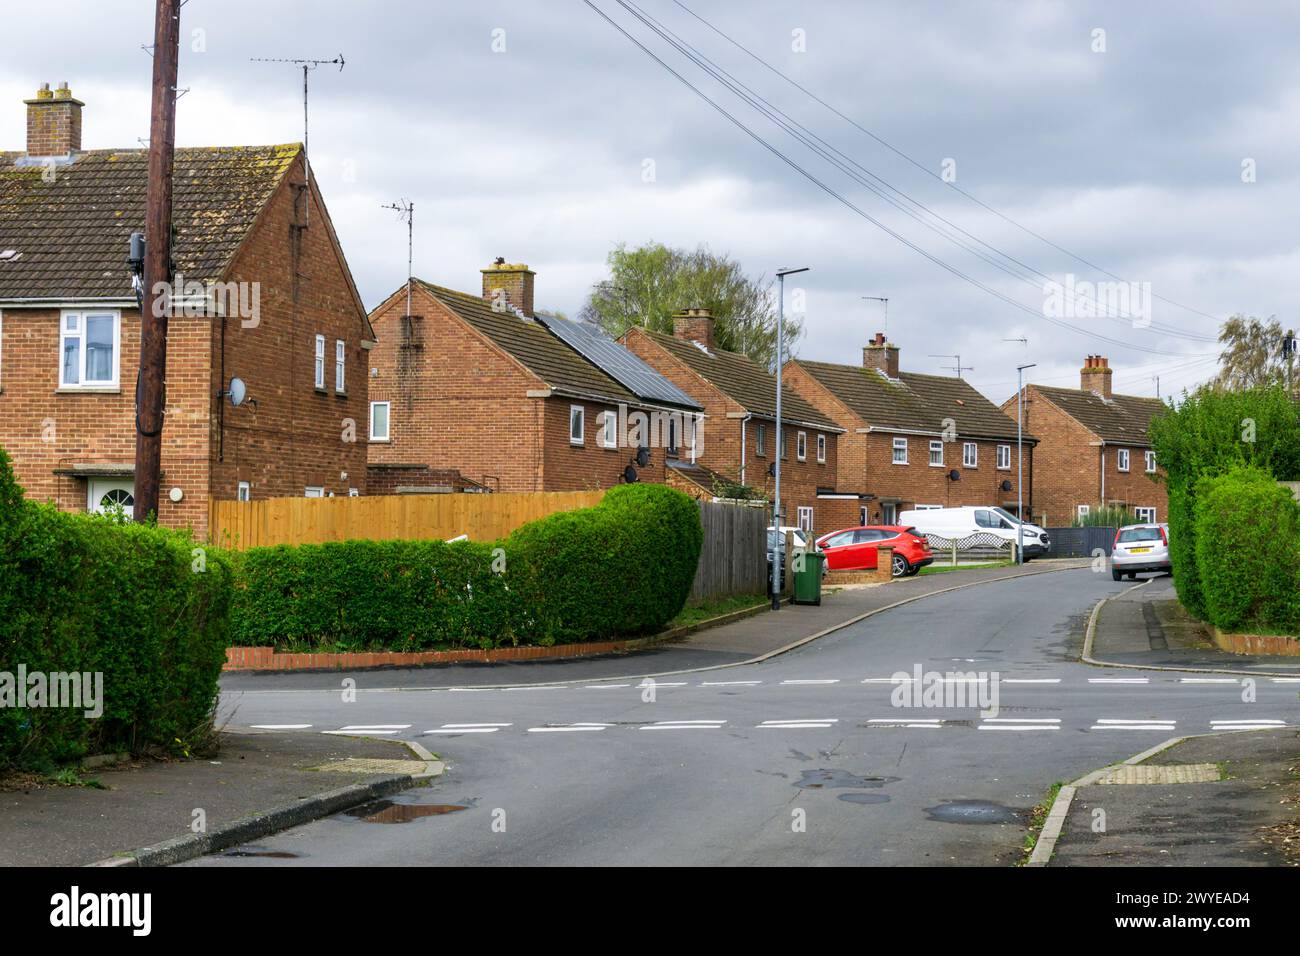 1950s style housing in Gaywood, a suburb of King's Lynn, Norfolk. Stock Photo